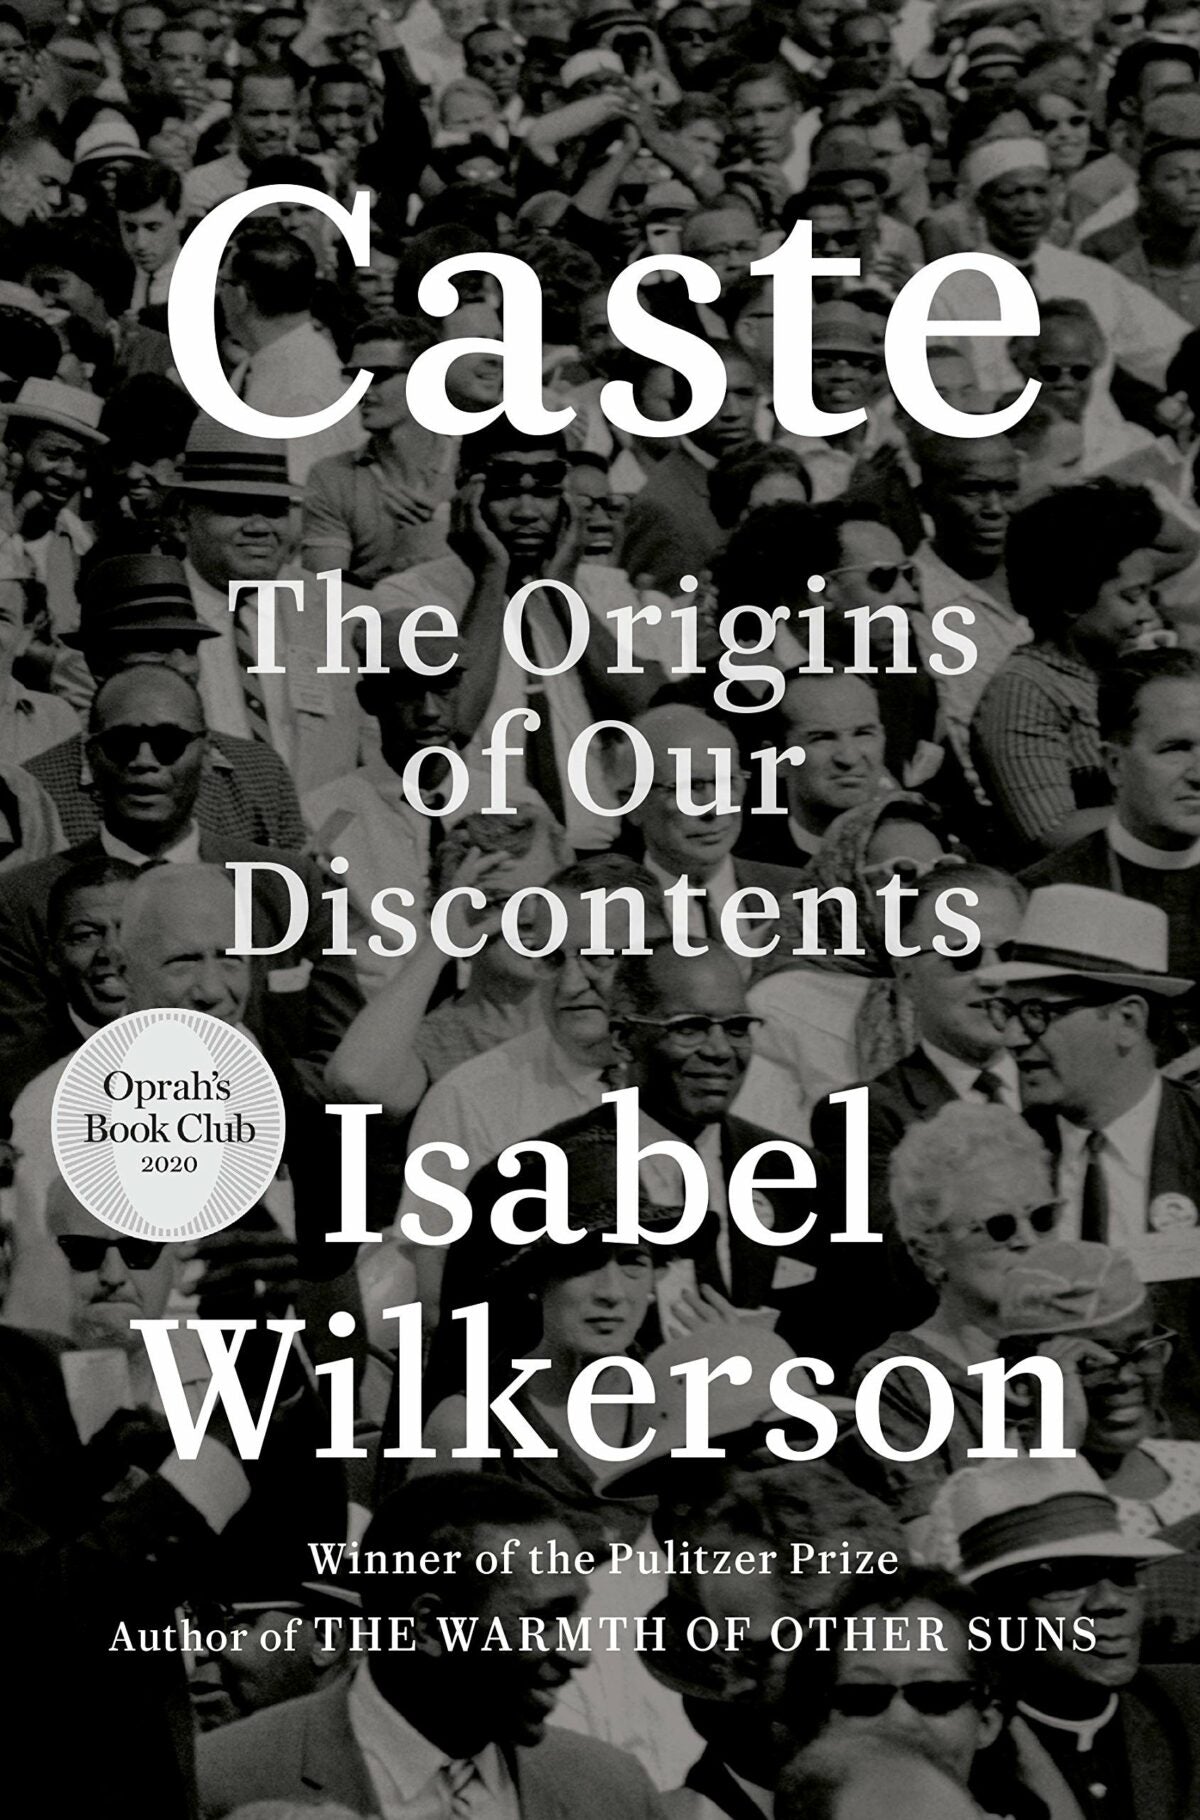 Caste: The Origins of Our Discontents (Hardcover)